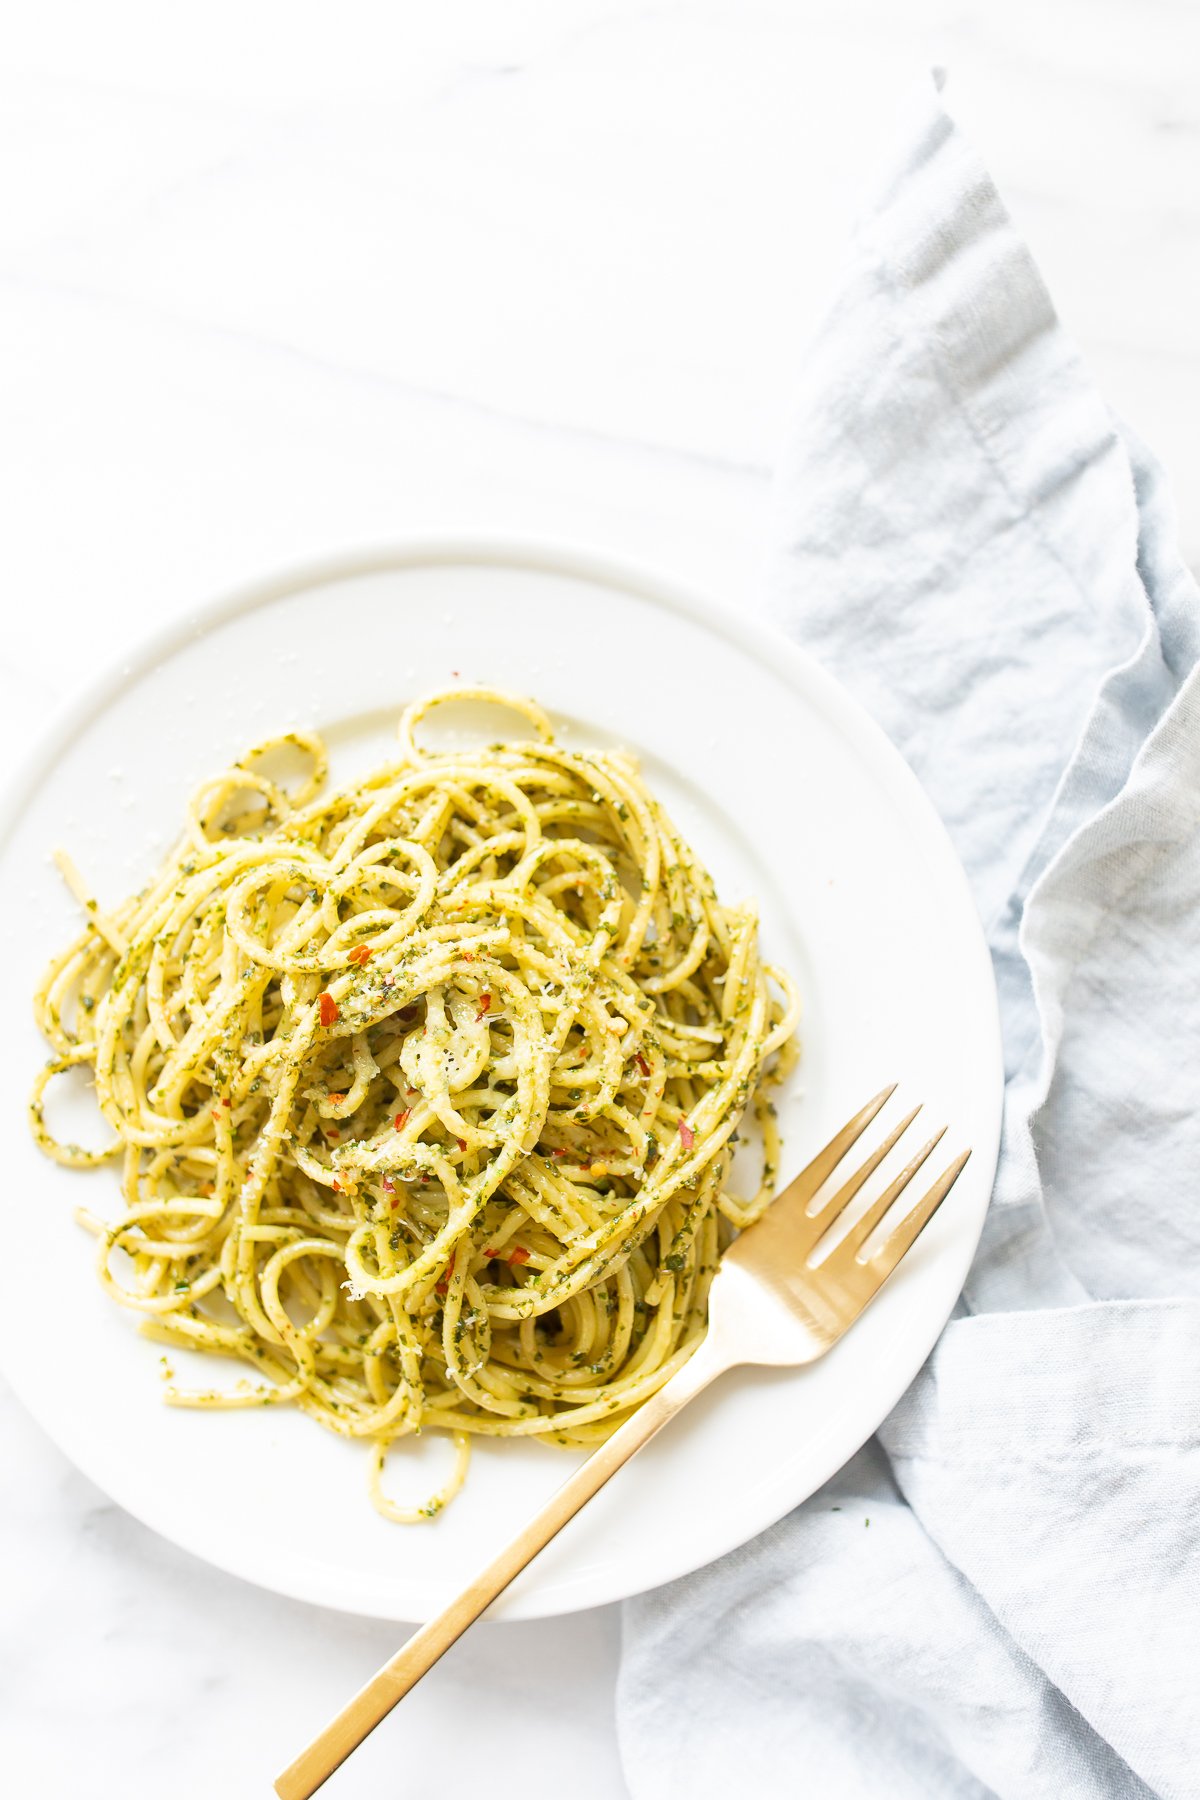 A tantalizing plate of pesto pasta with a fork on top, ready to be devoured.